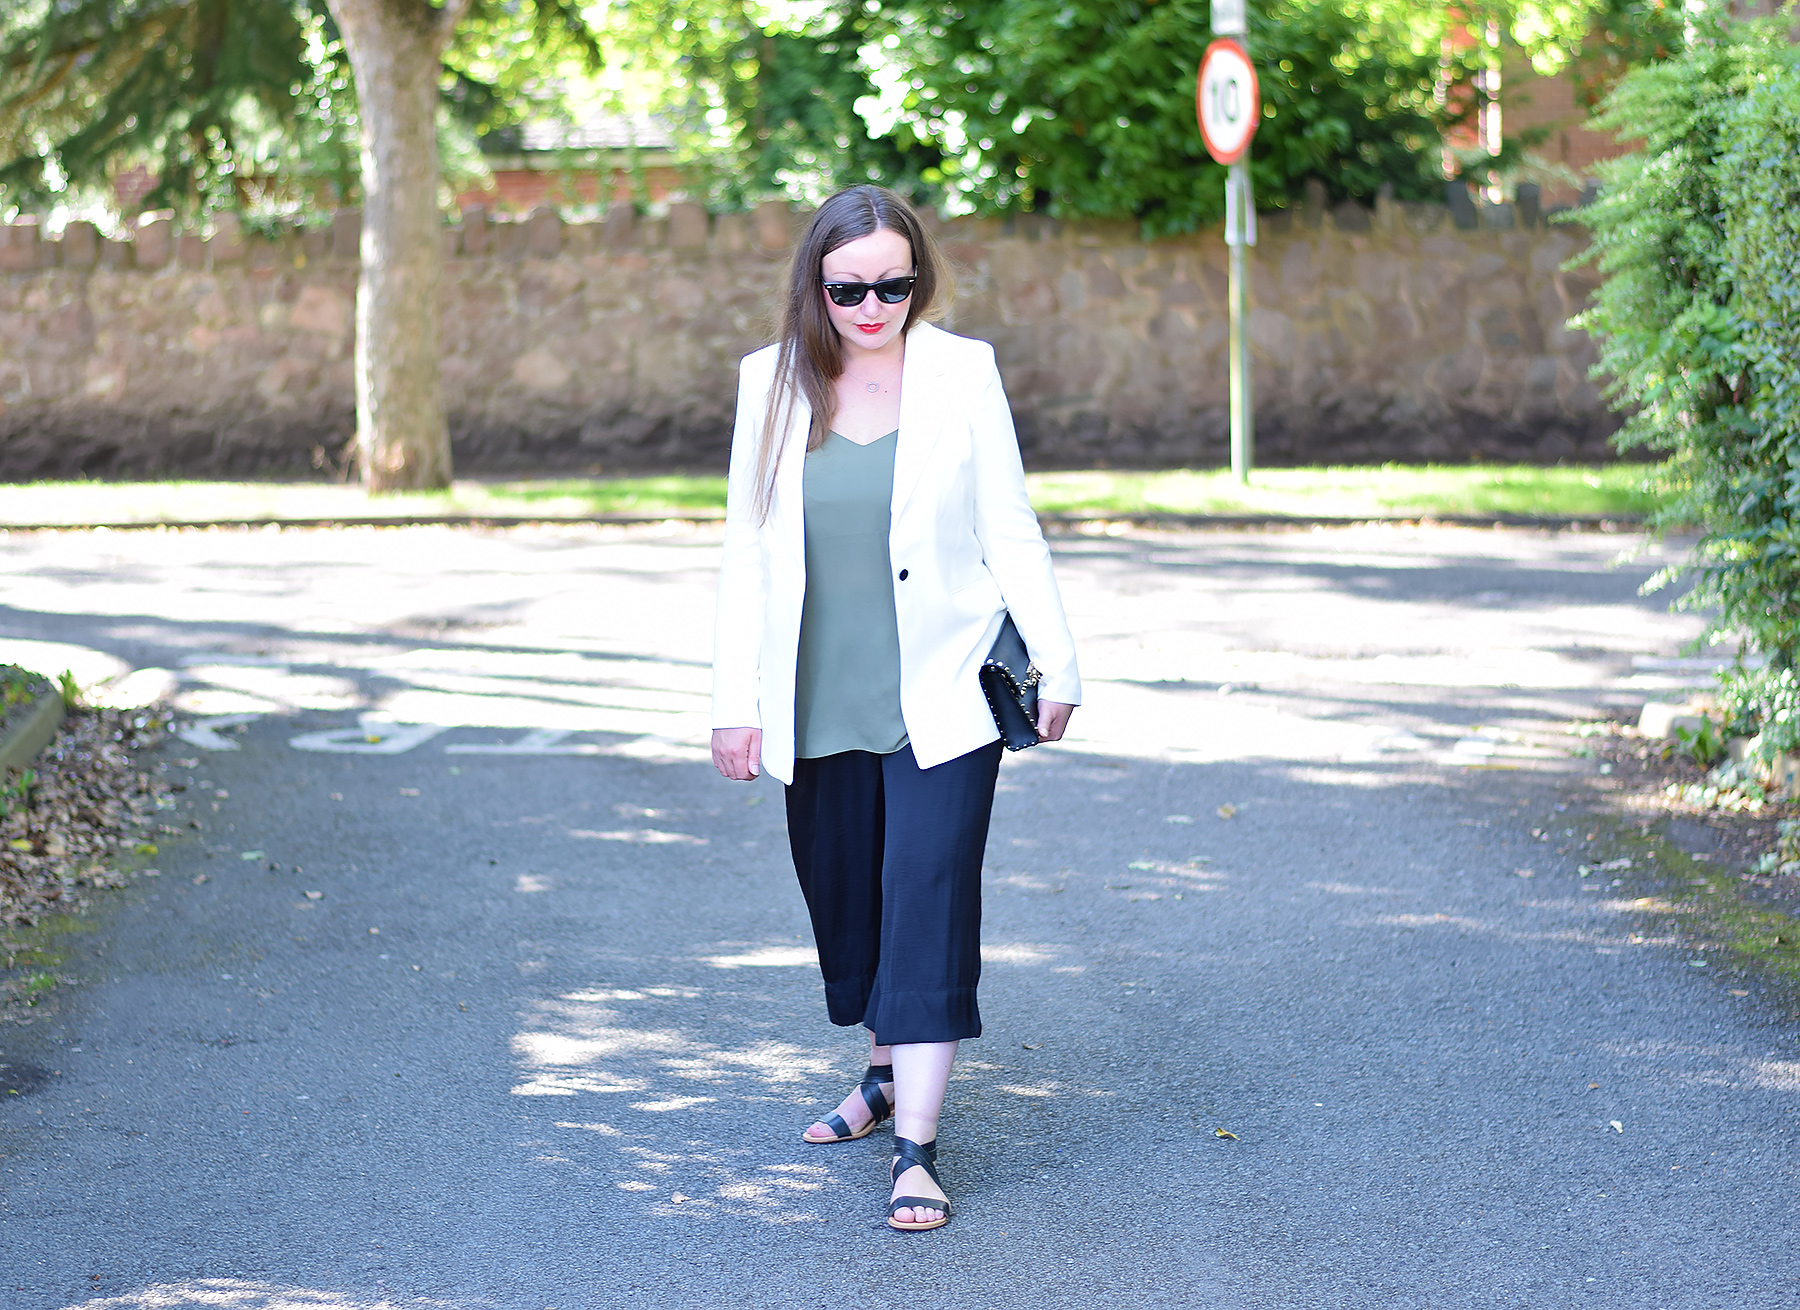 Jacquard Flower Uk Fashion Blogger wearing blazer and culottes outfit